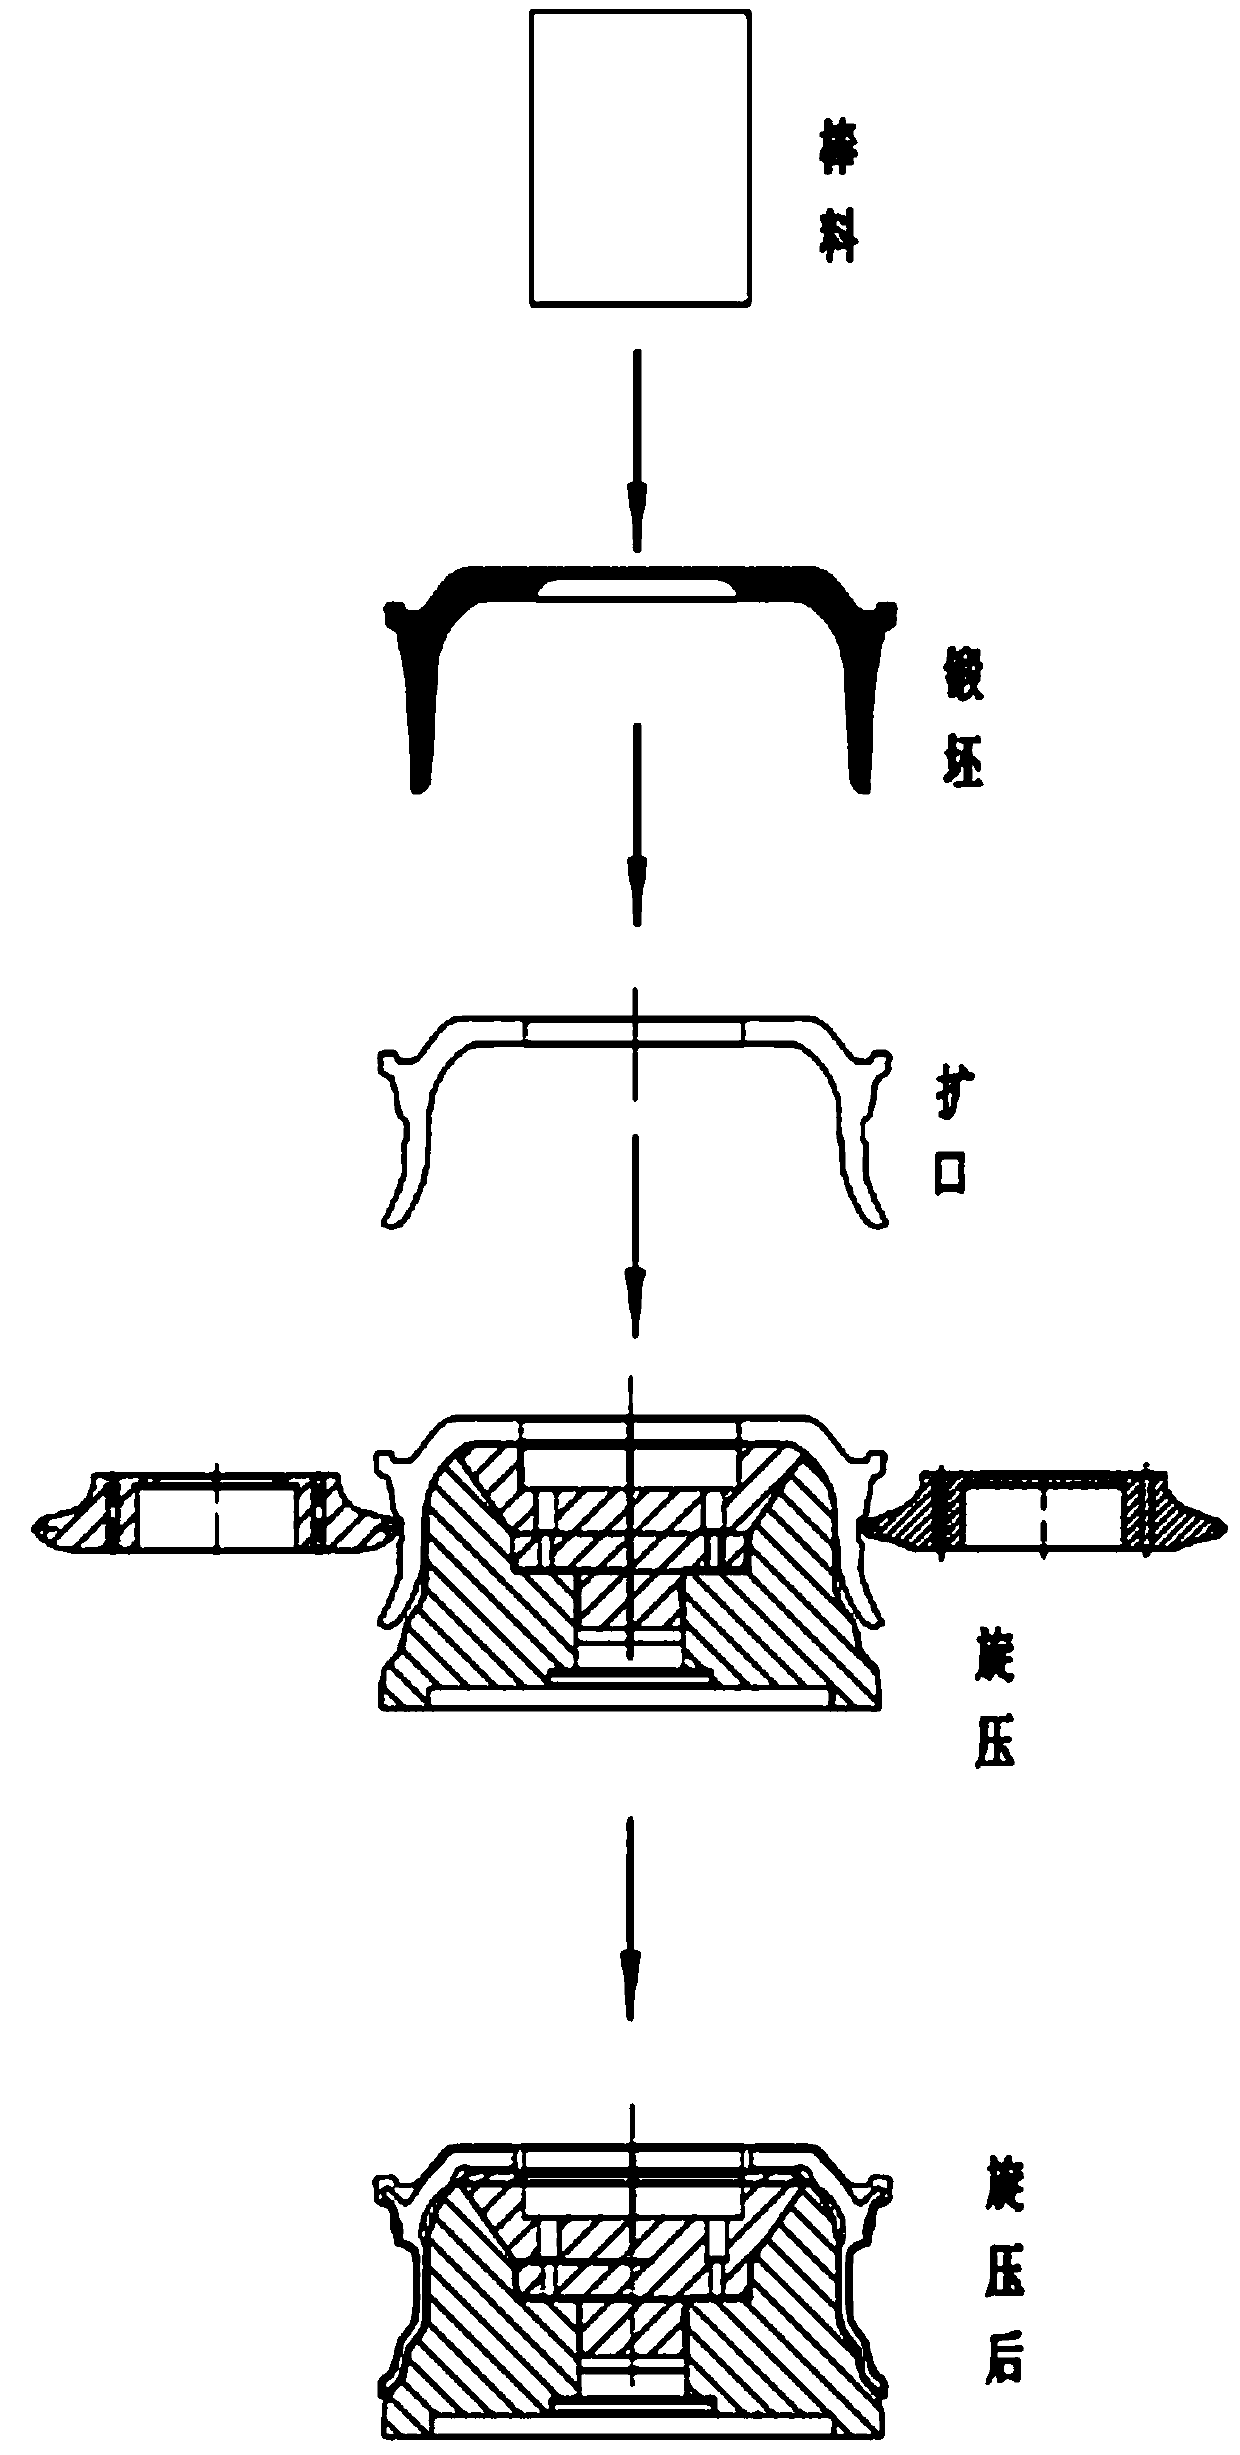 Magnesium alloy wheel forging-spinning composite forming method